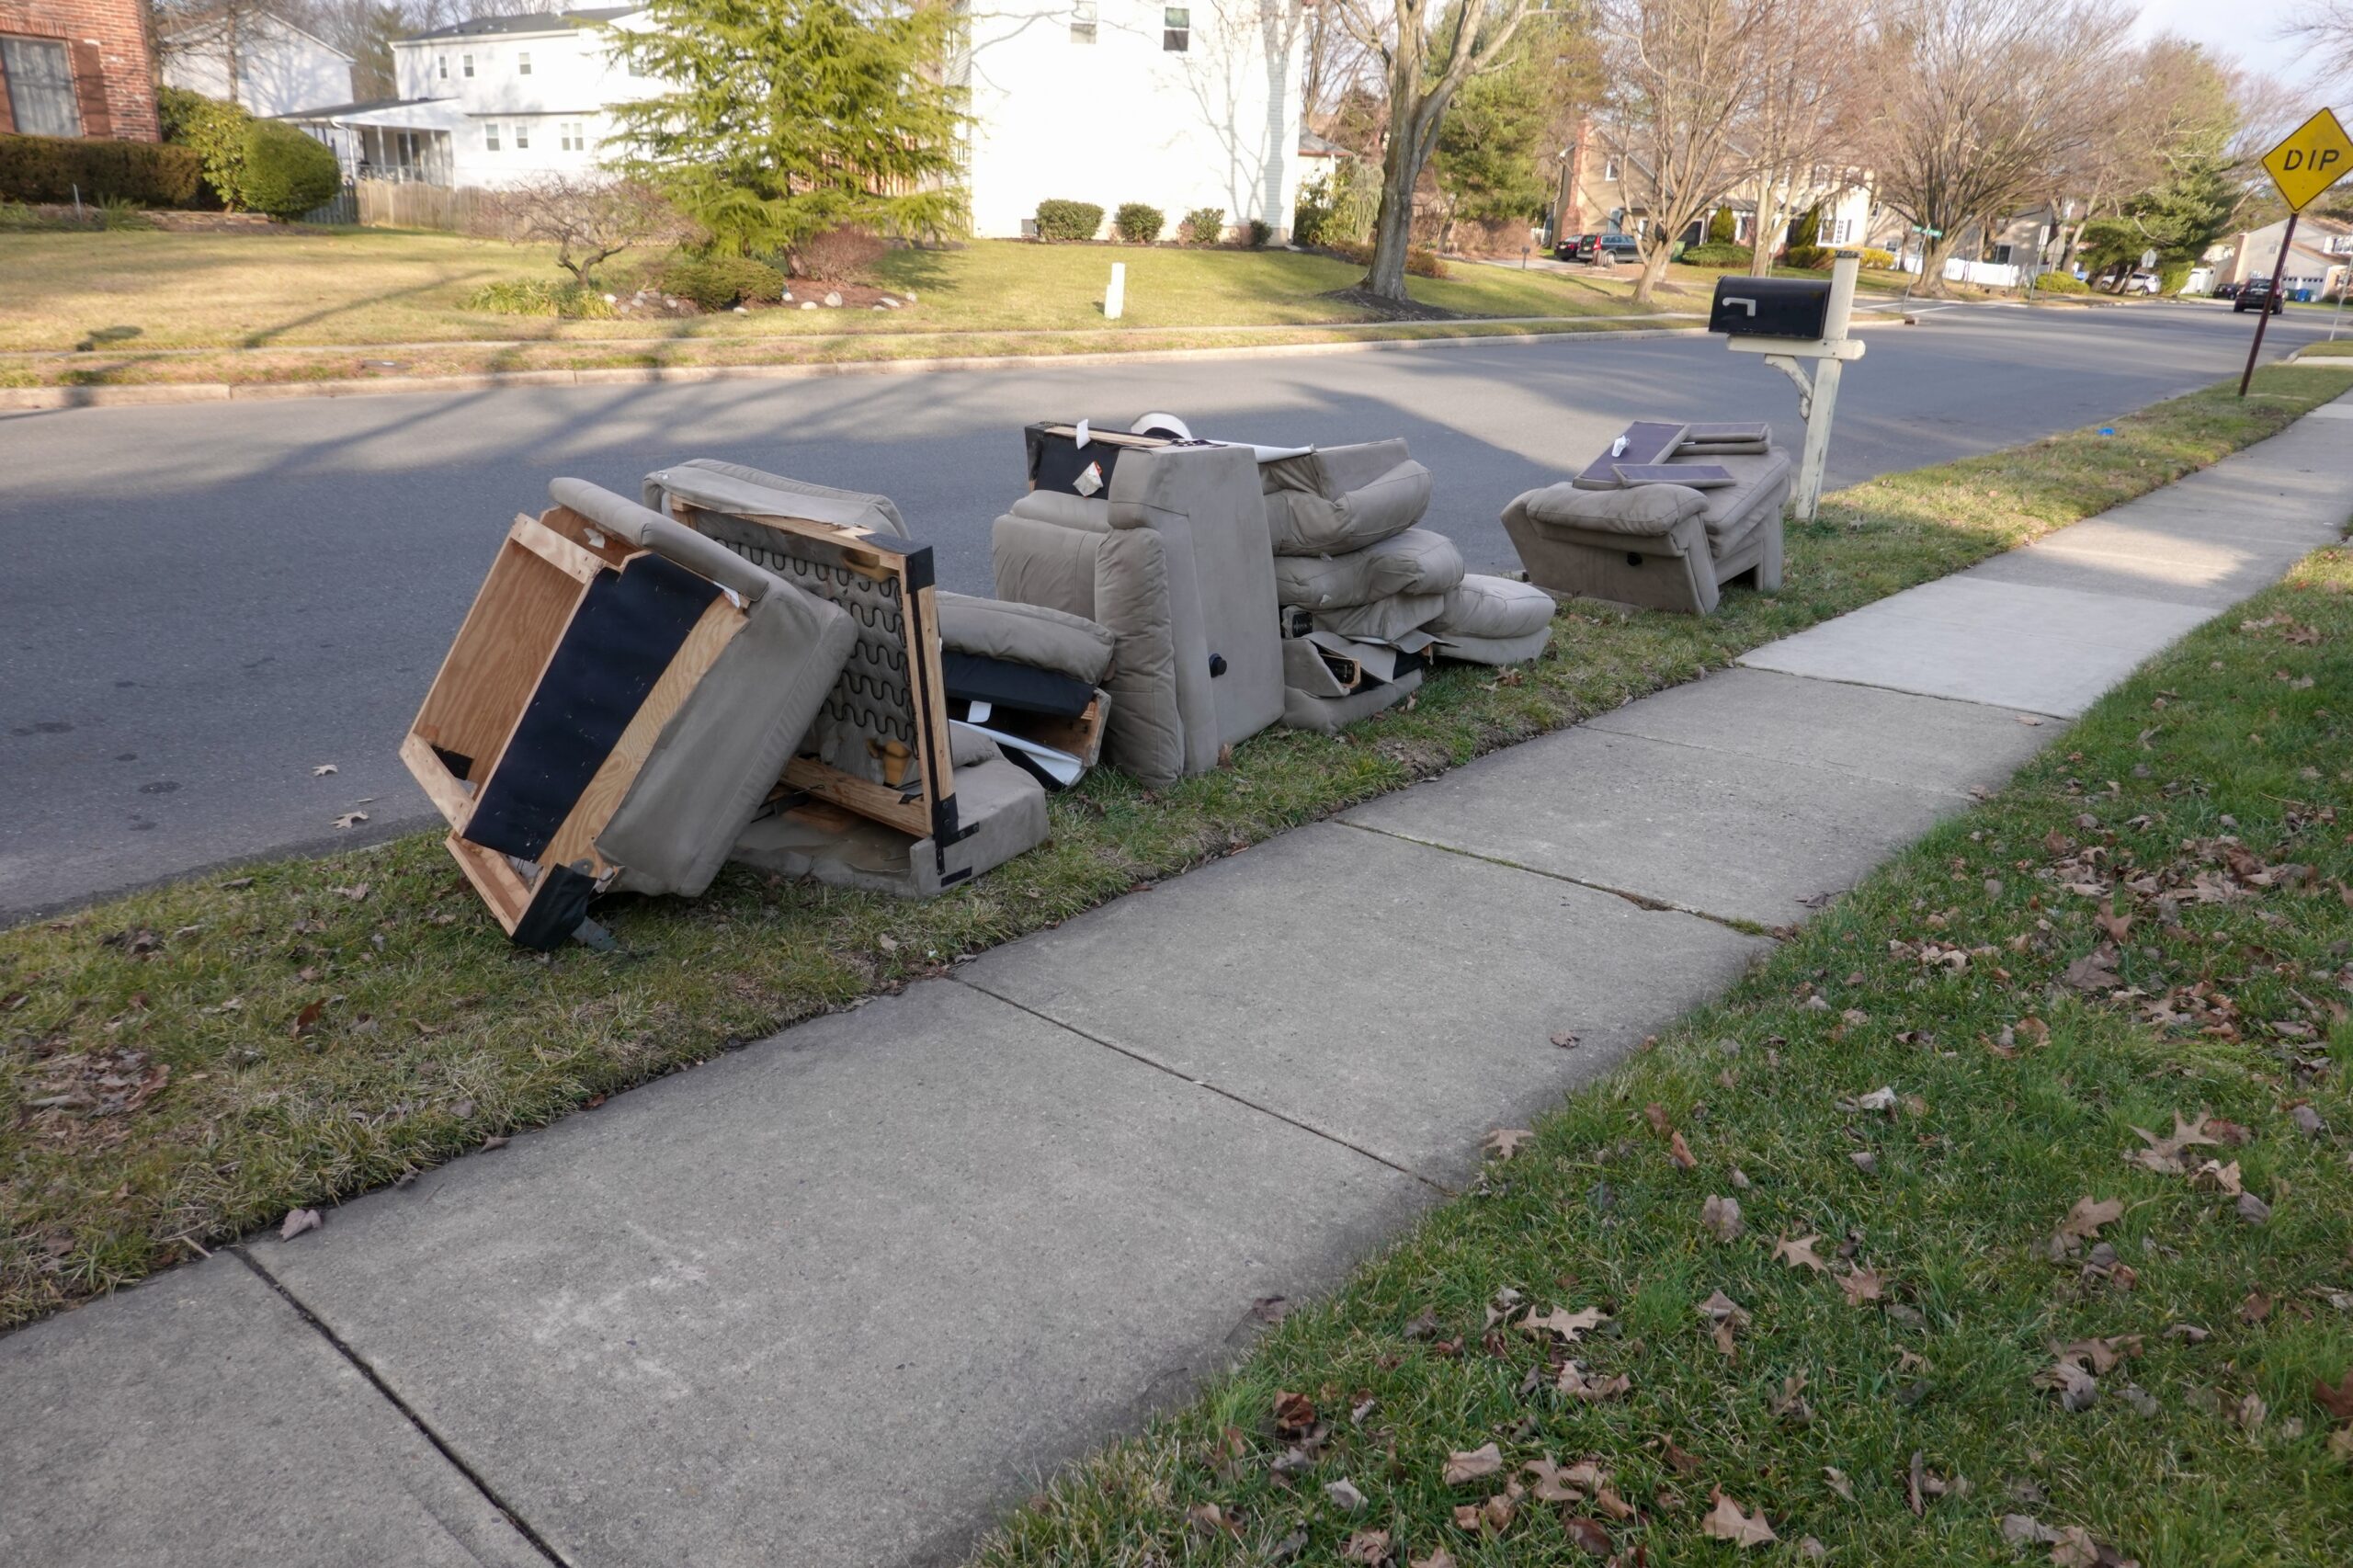 unwanted furniture items on curb of home waiting to be removed or picked up